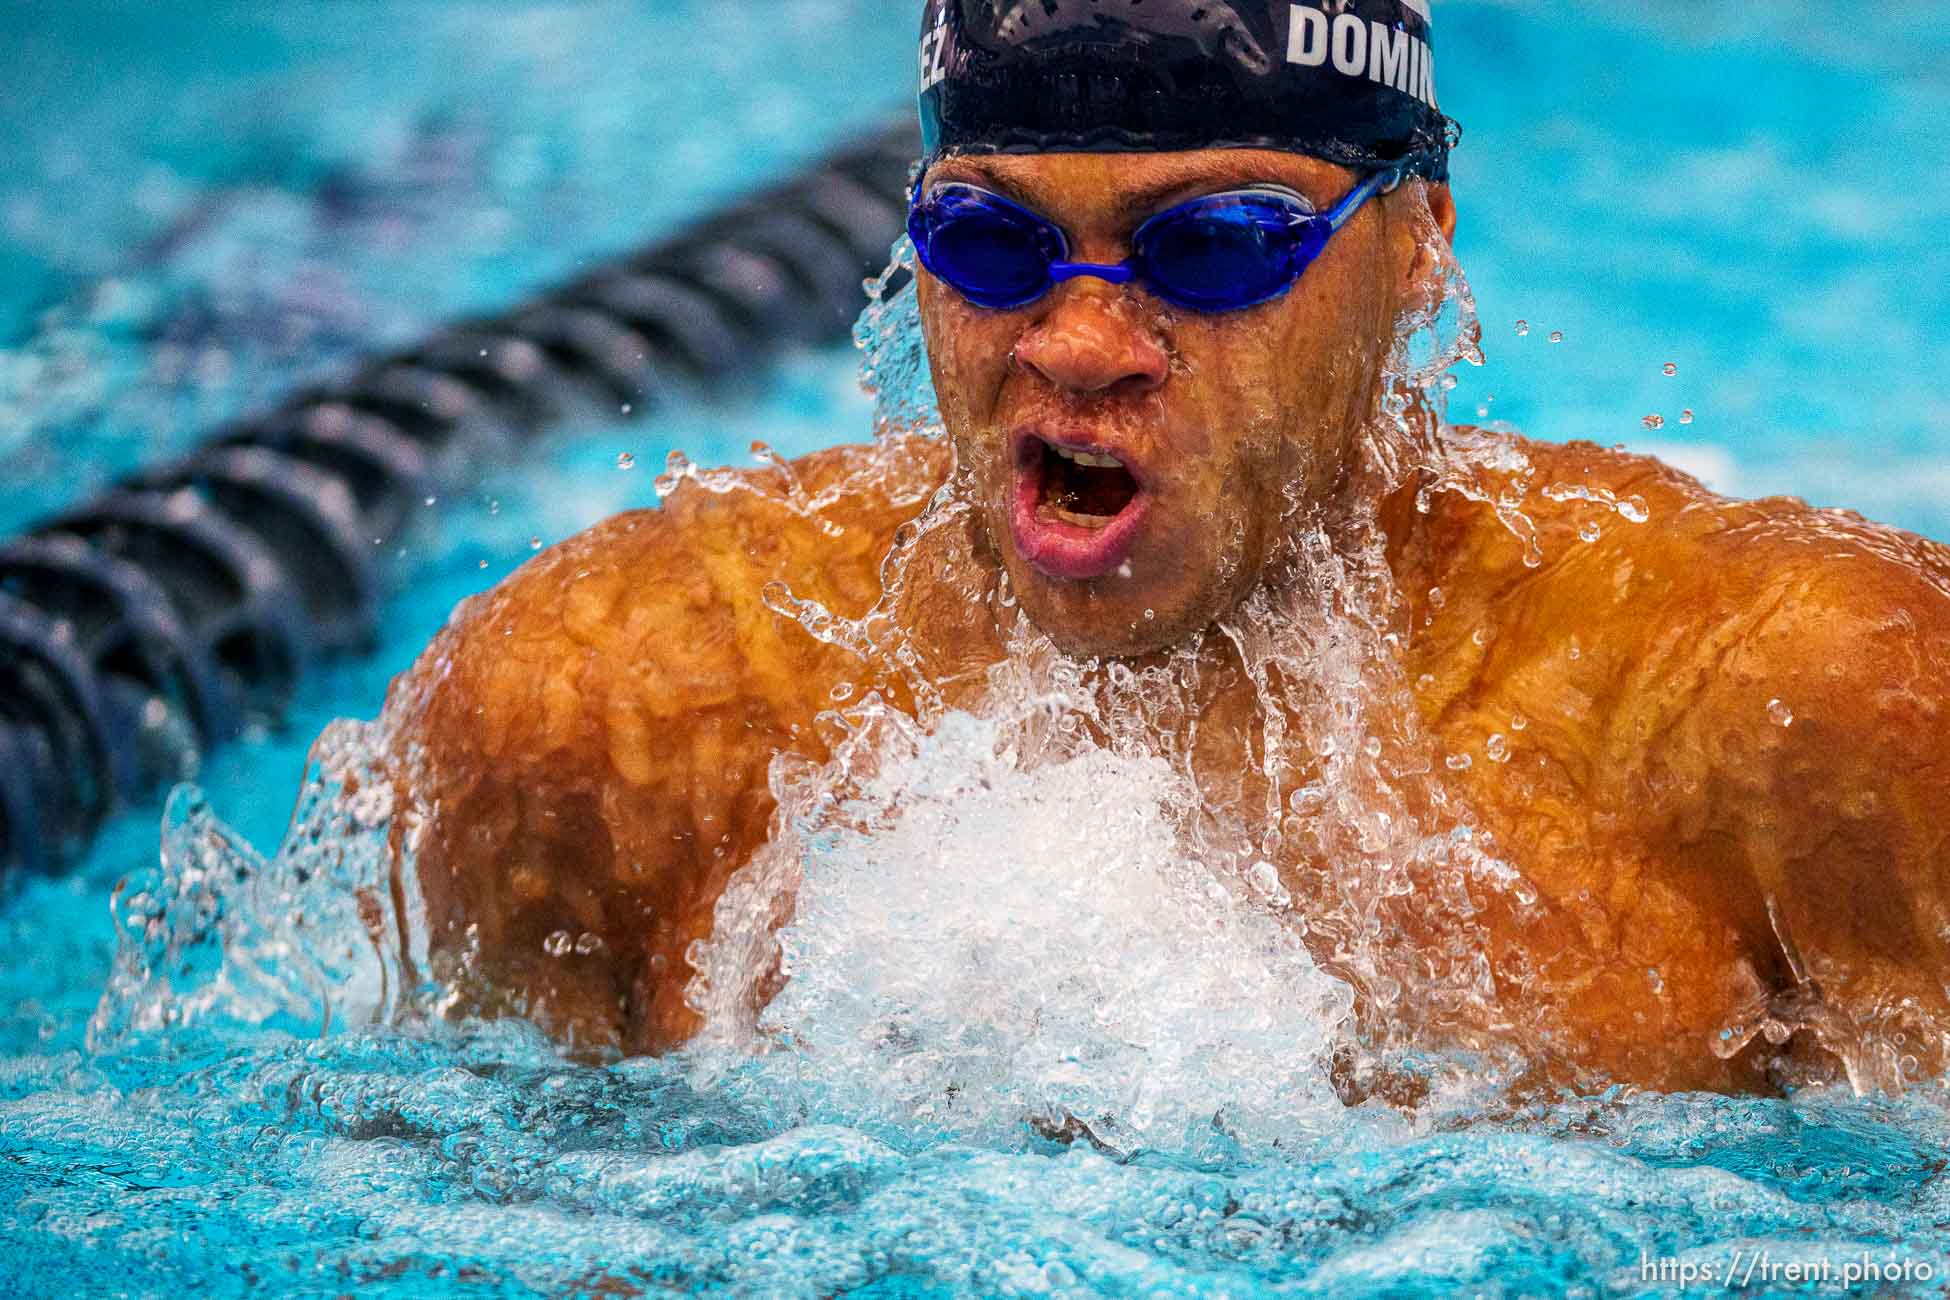 (Trent Nelson  |  The Salt Lake Tribune) BYU swimmer Josue Dominguez will be the only male swimming for the Dominican Republic at the Olympics in Tokyo. Dominguez was photographed at BYU in Provo on Thursday, July 8, 2021.